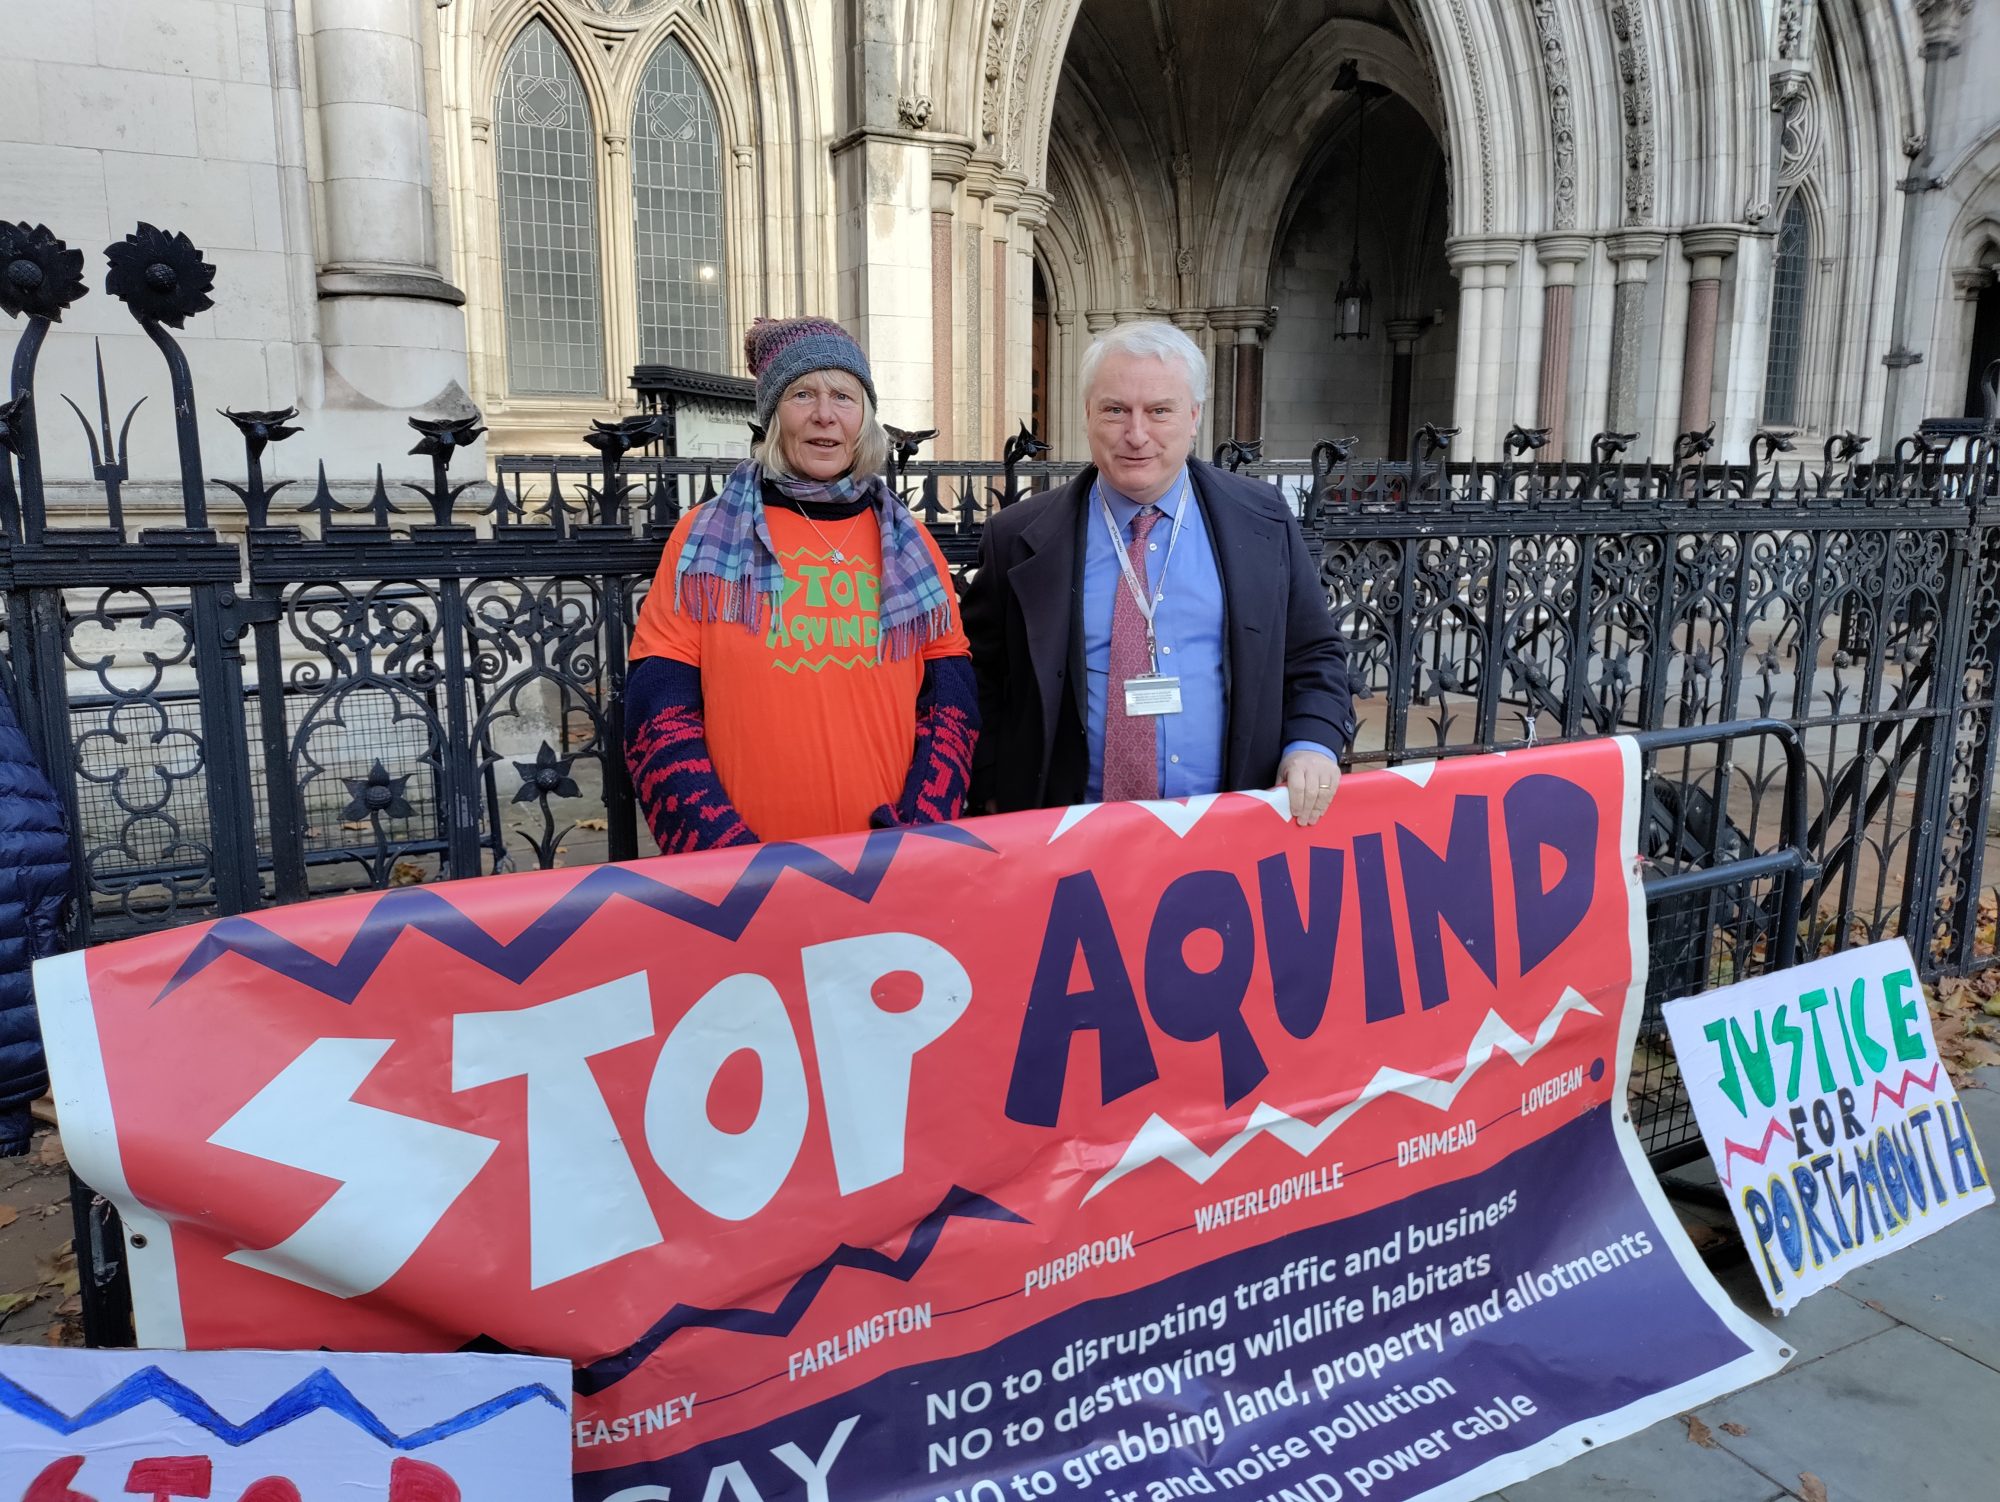 Let's Stop Aquind Co-founder Viola Langley with Gerald Vernon-Jackson